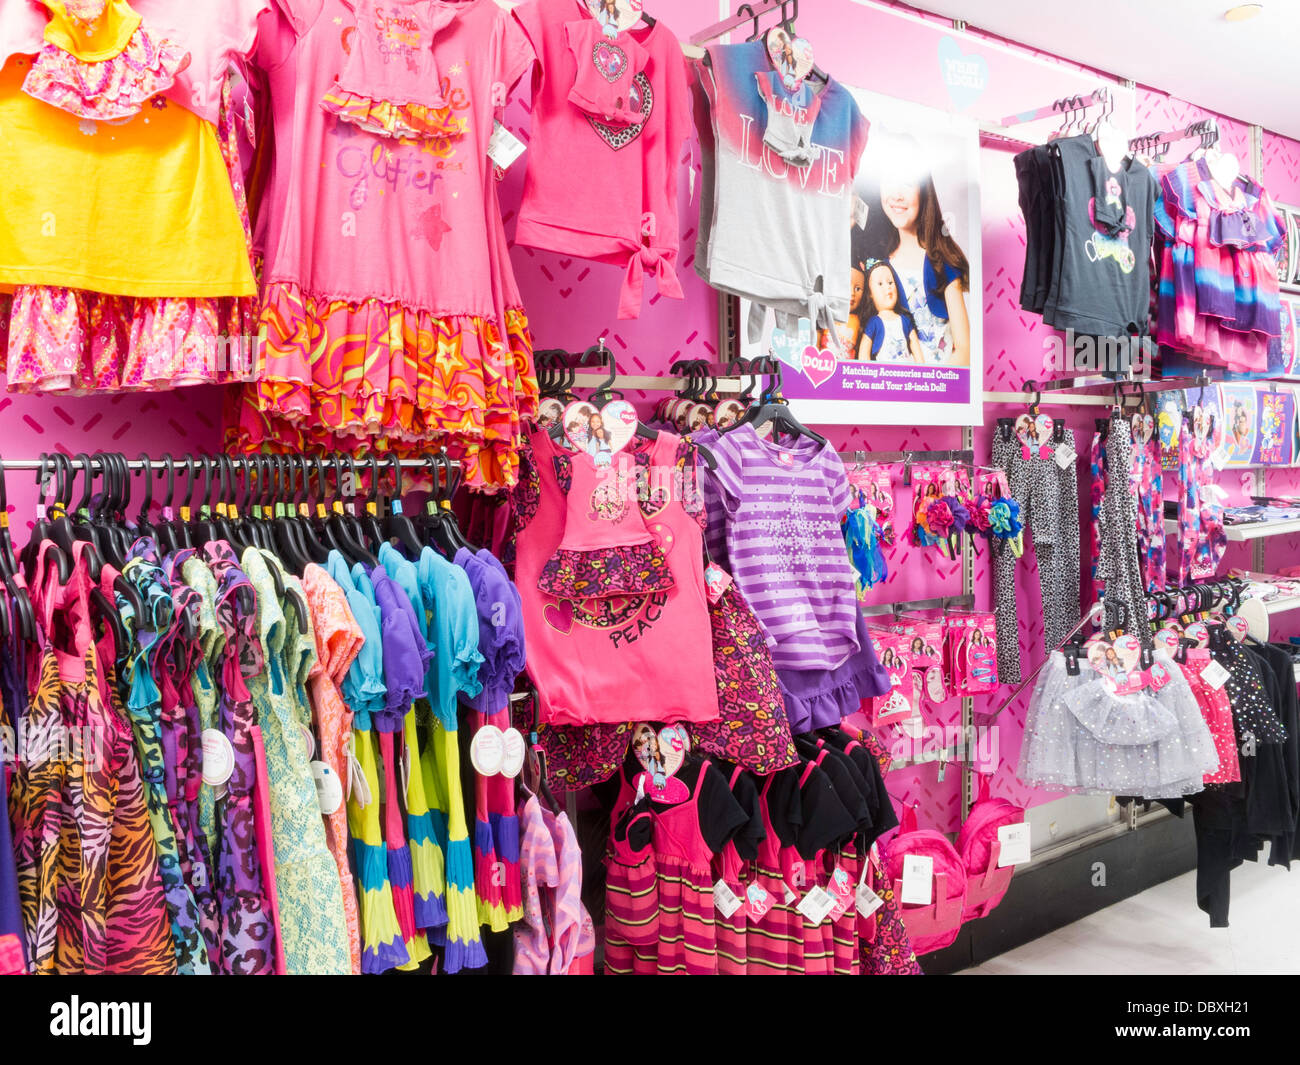 Girls Clothing Display In Kmart Nyc Stock Photo Royalty Free inside Kmart Clothes For Girls